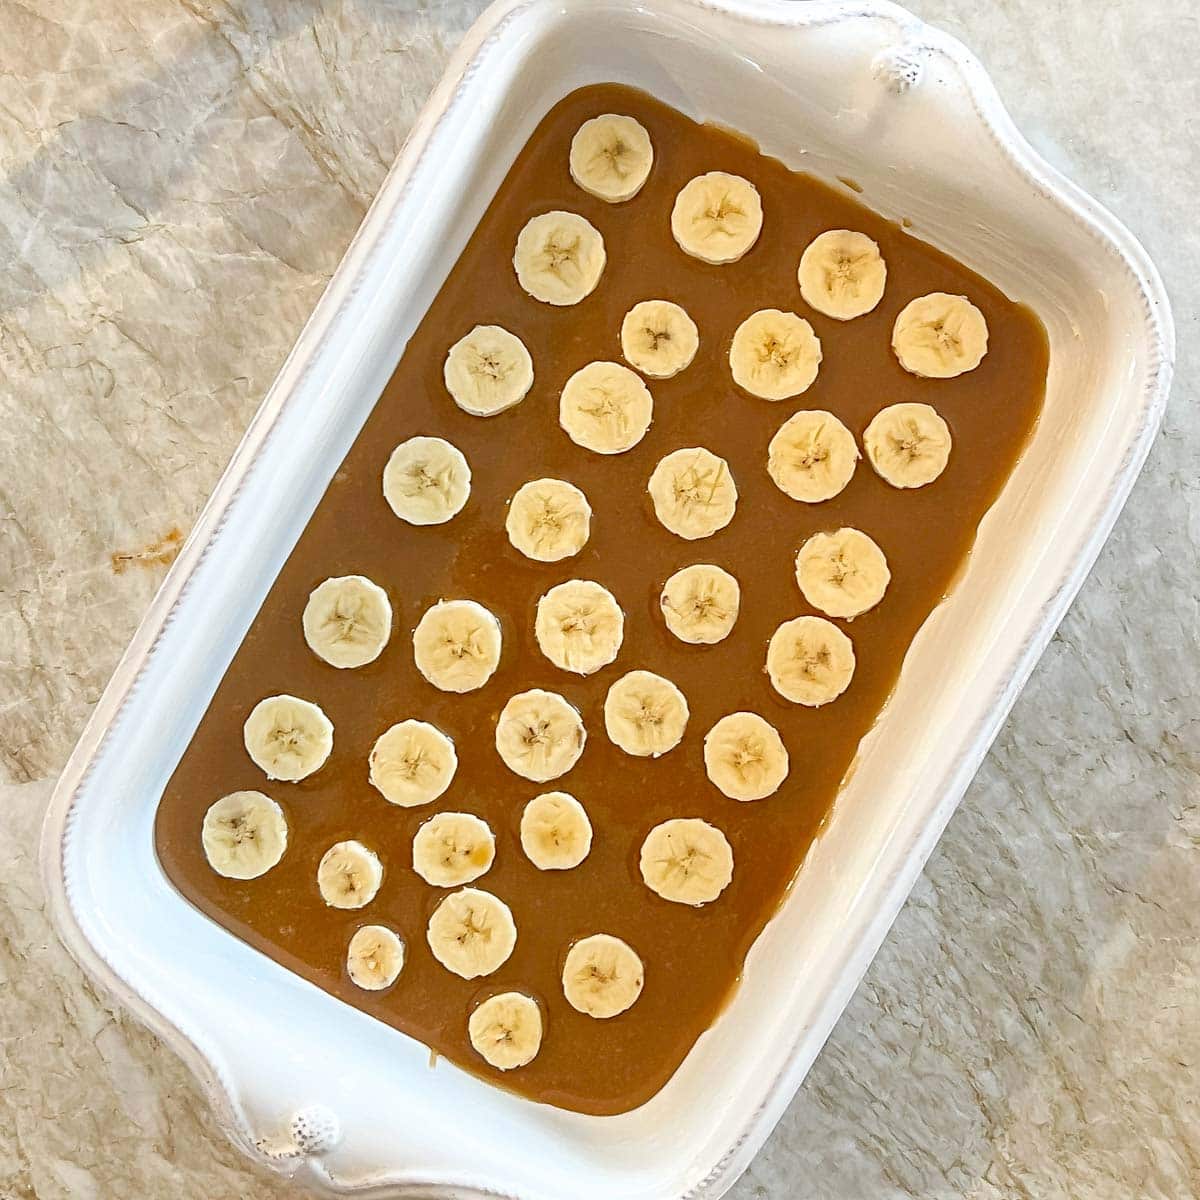 Process shot showing caramel sauce and bananas in bottom of casserole dish